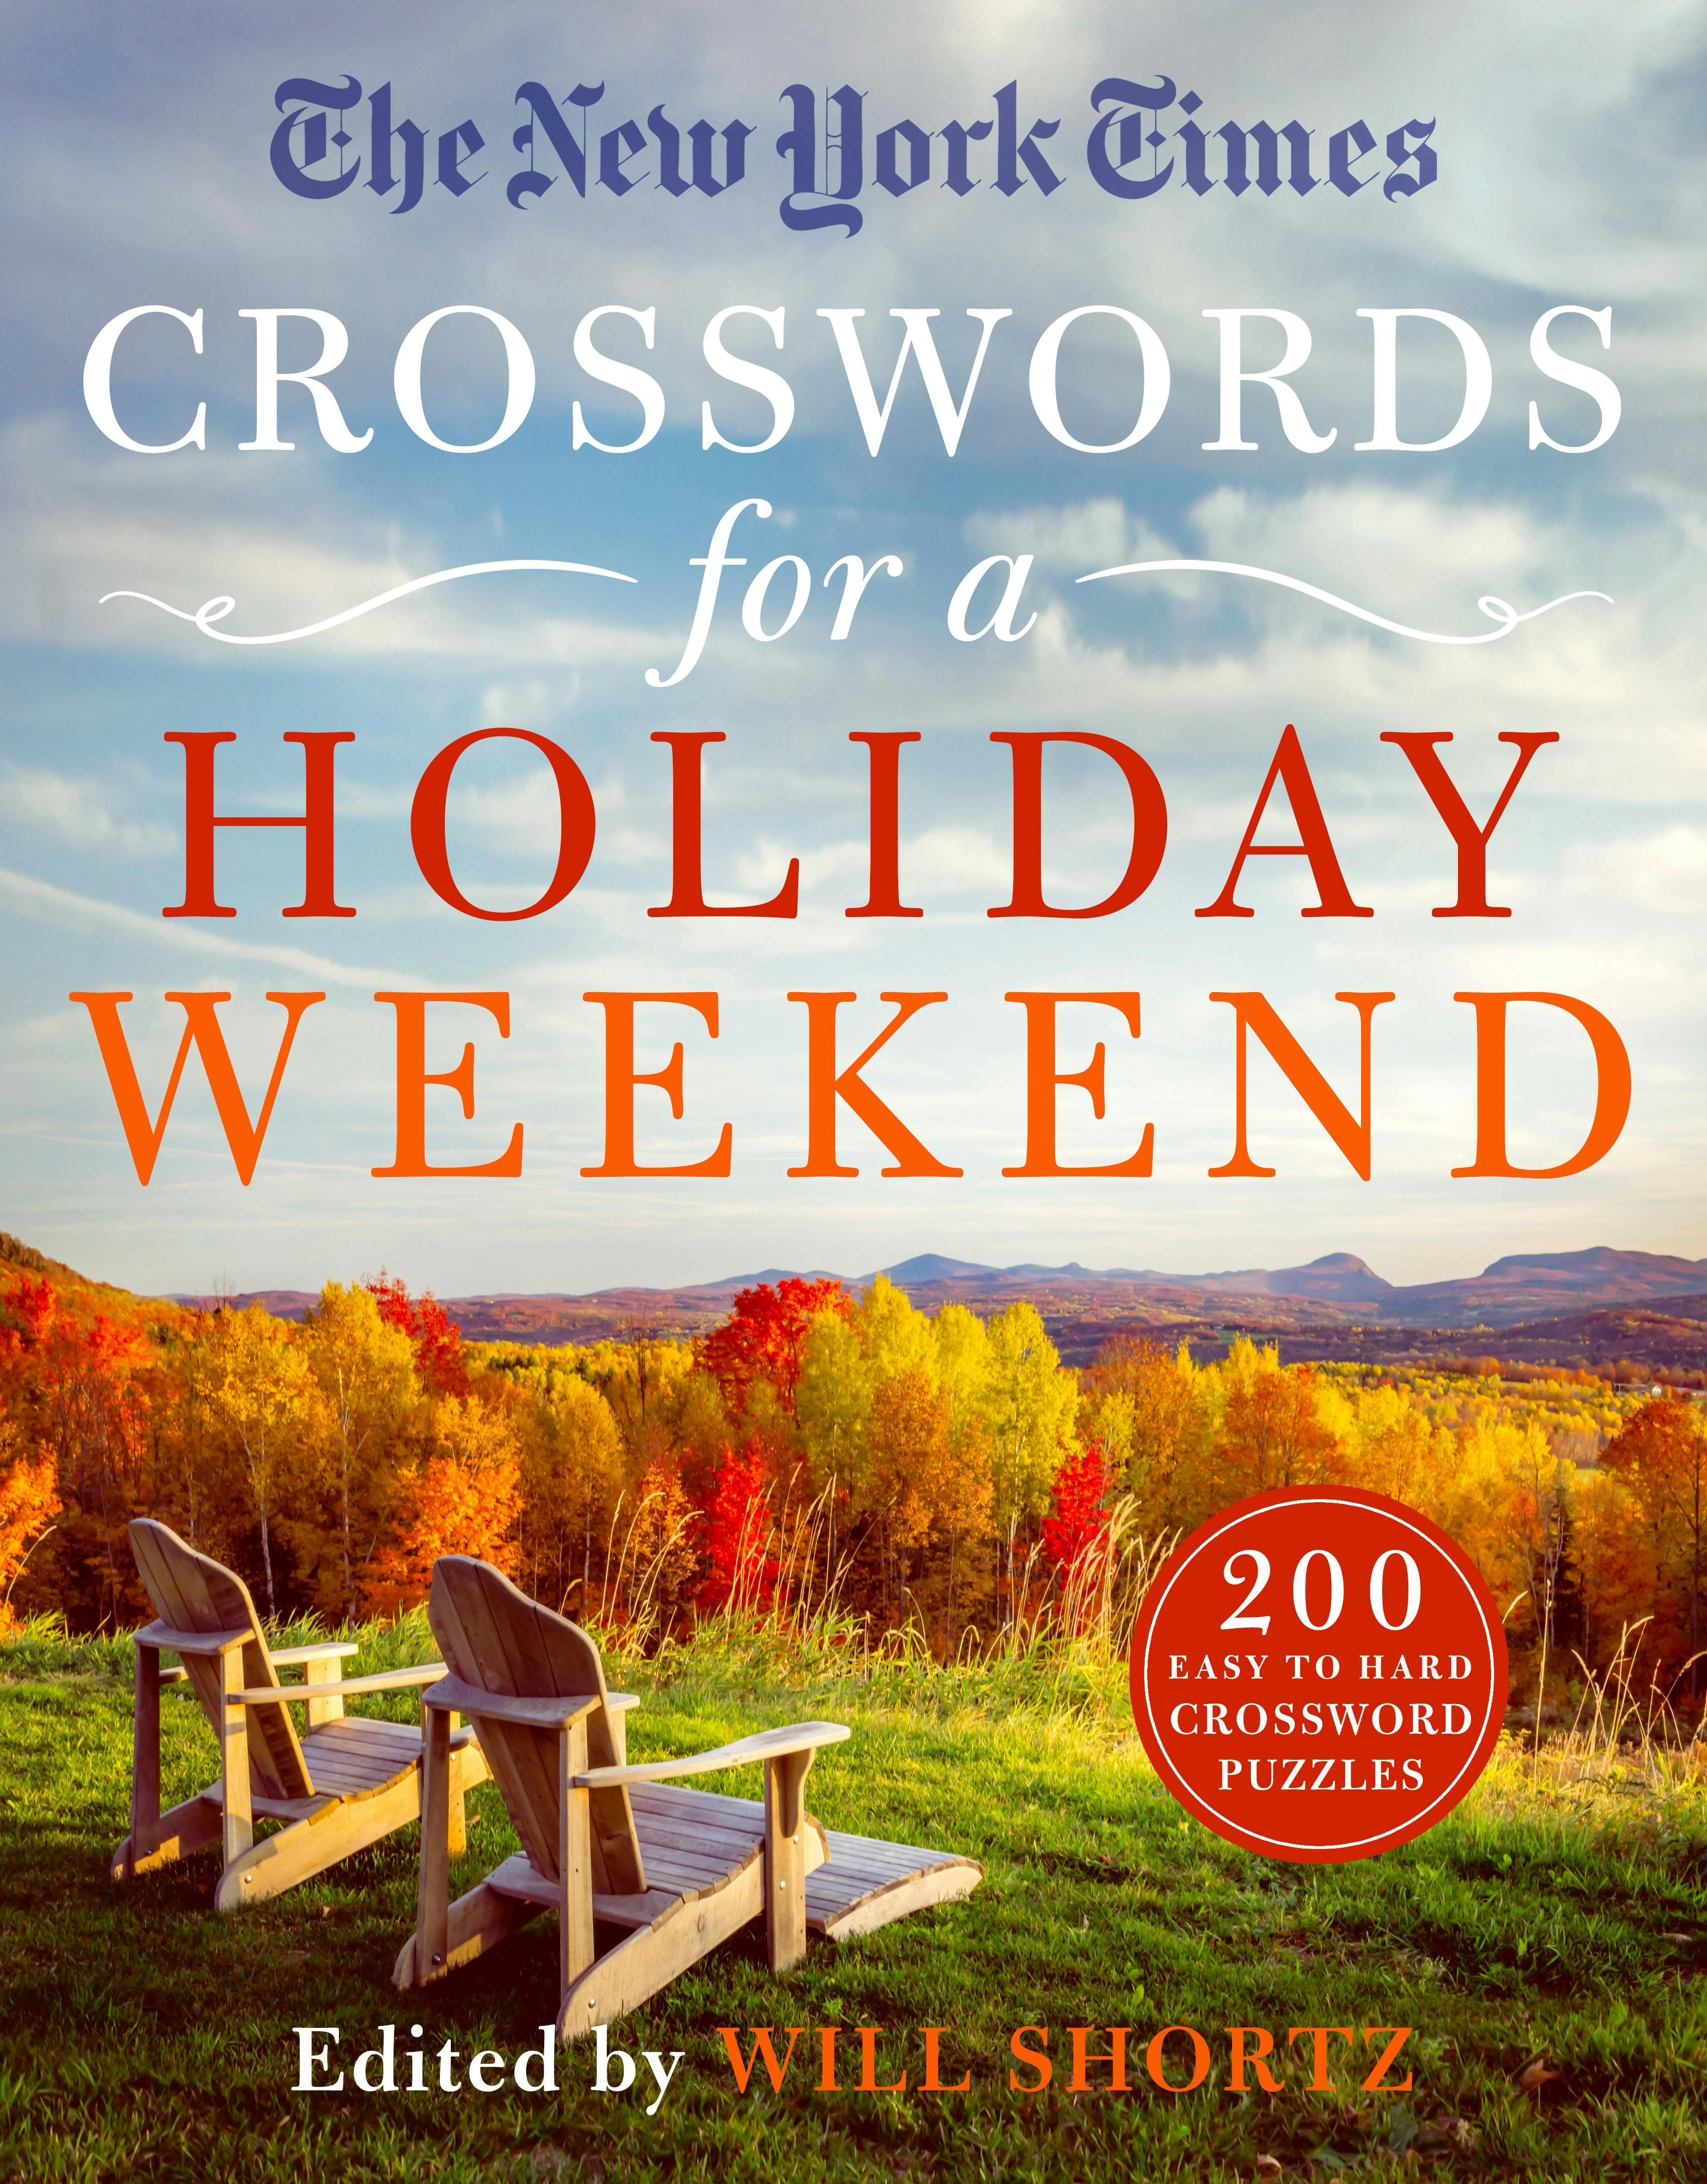 The New York Times Crosswords for a Holiday Weekend